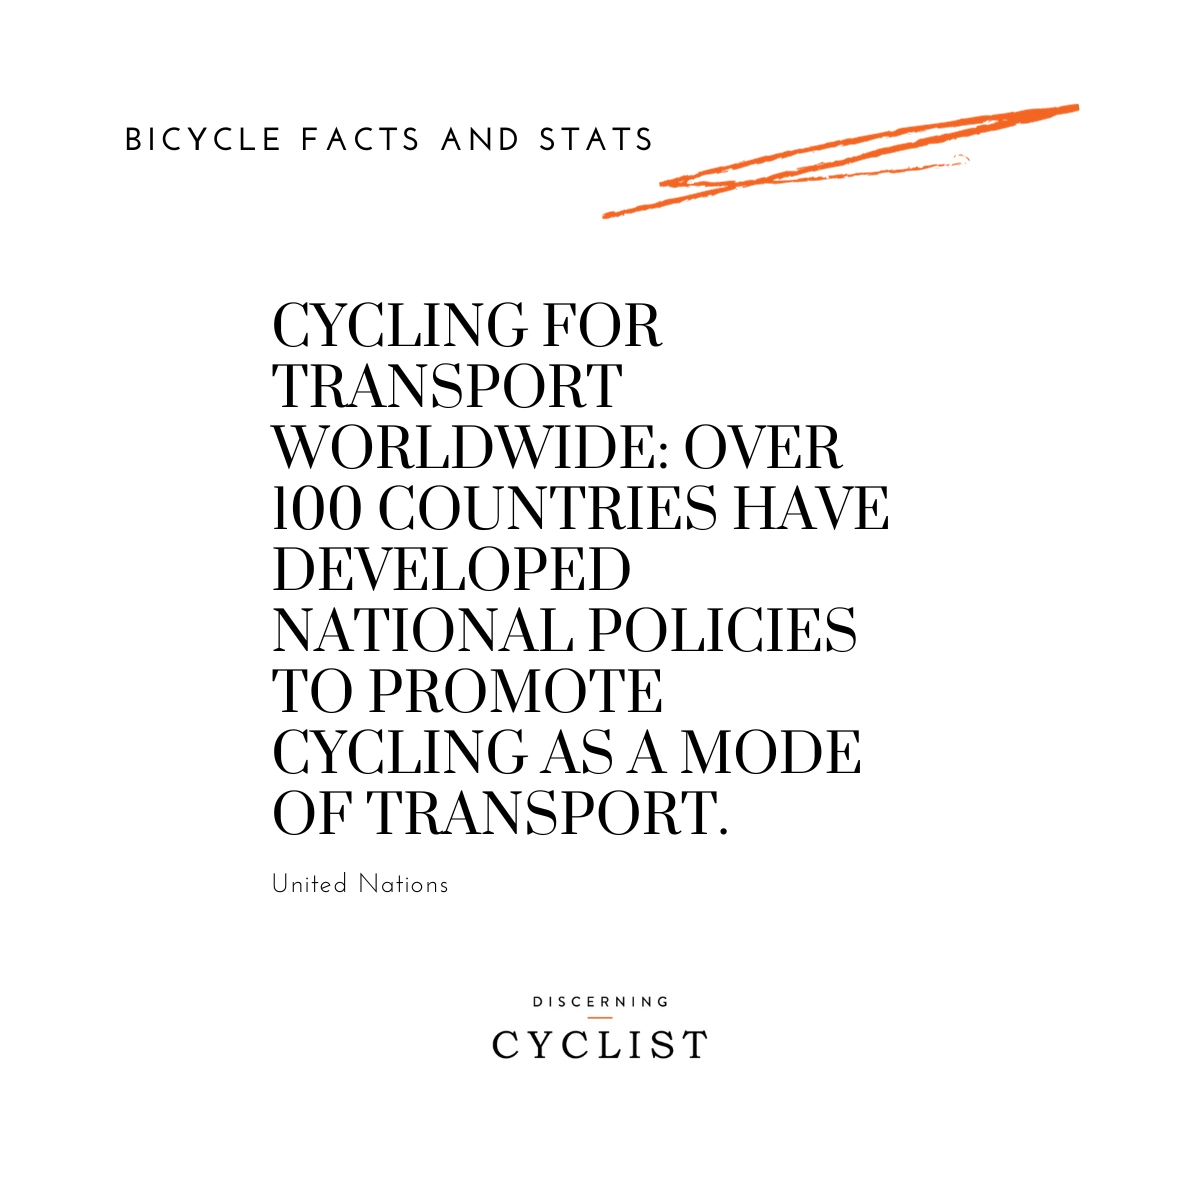 Cycling for Transport Worldwide: Over 100 countries have developed national policies to promote cycling as a mode of transport.